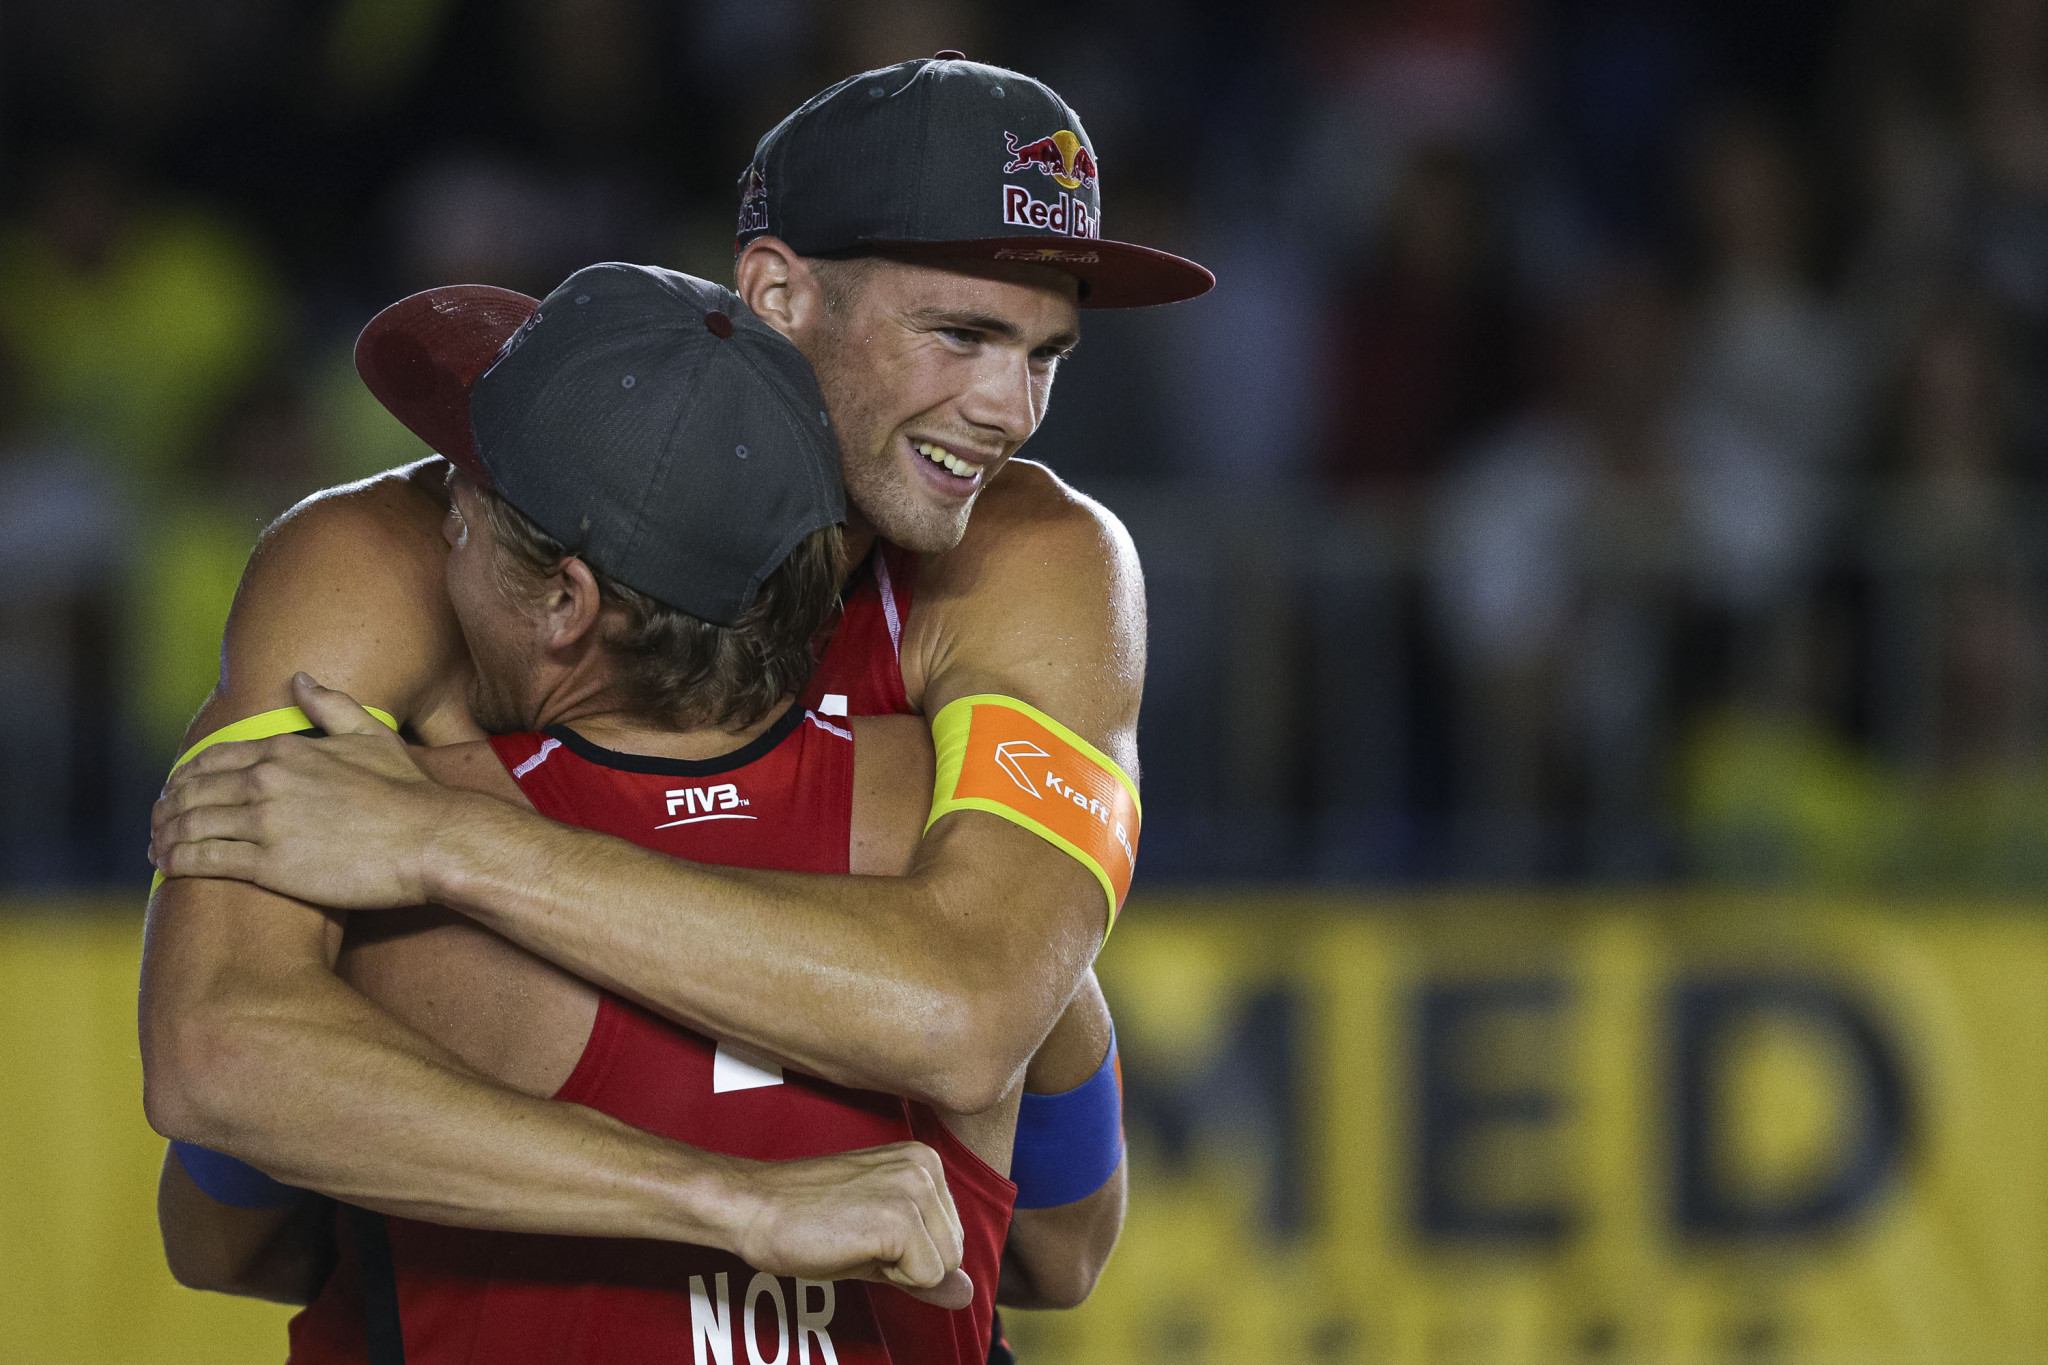 Anders Mol and Christian Sørum of Norway were crowned International Volleyball Federation World Beach Tour champions in Ostrava ©Getty Images